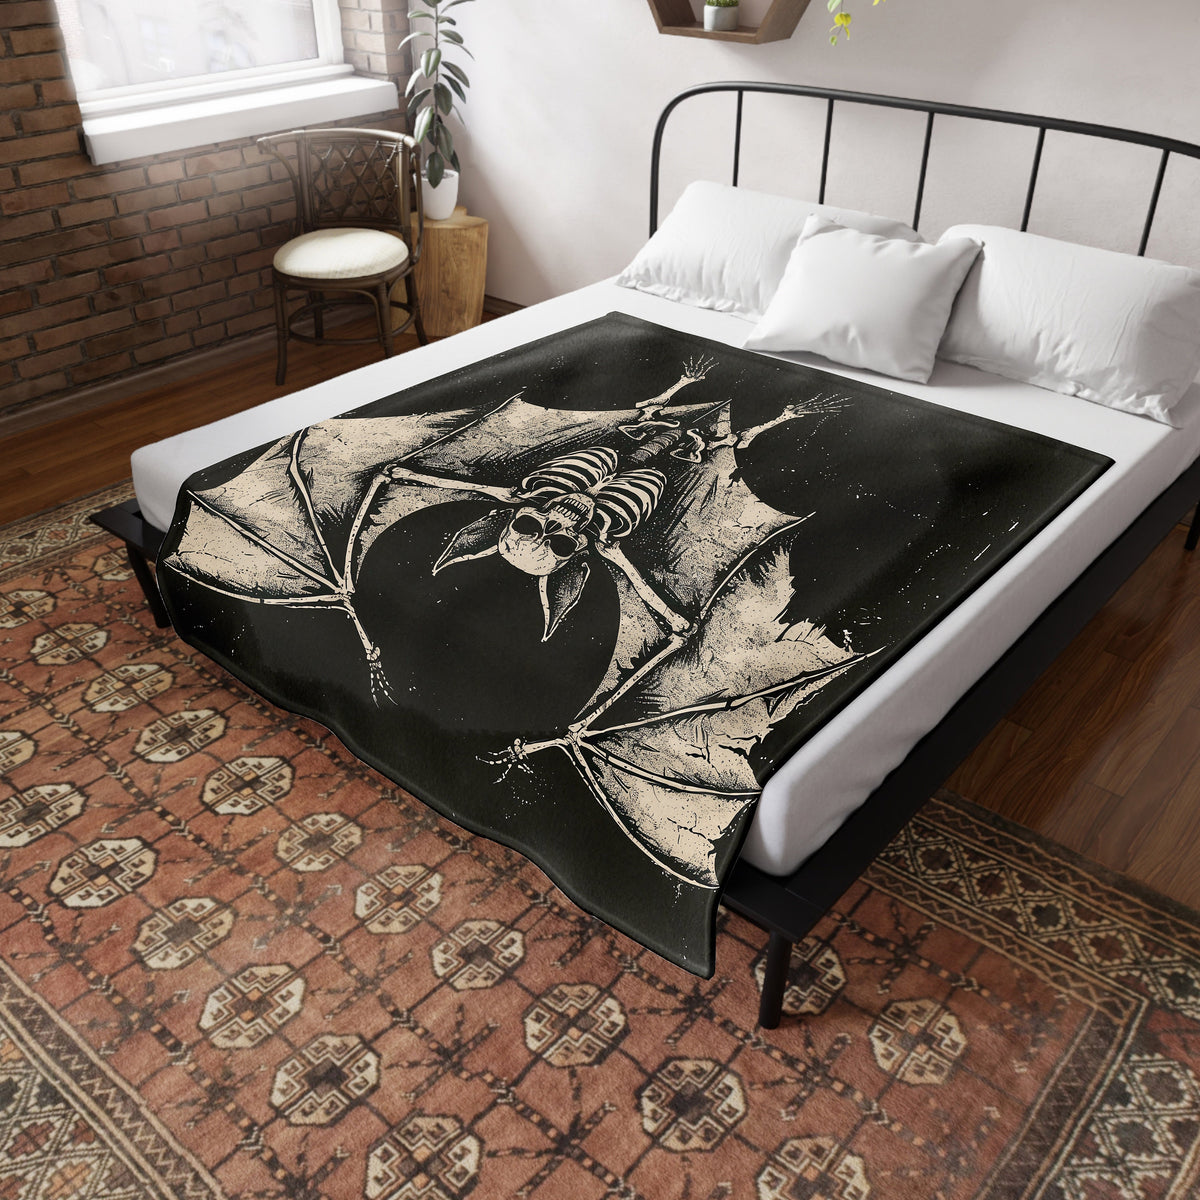 a bed with a black and white picture of a bat on it